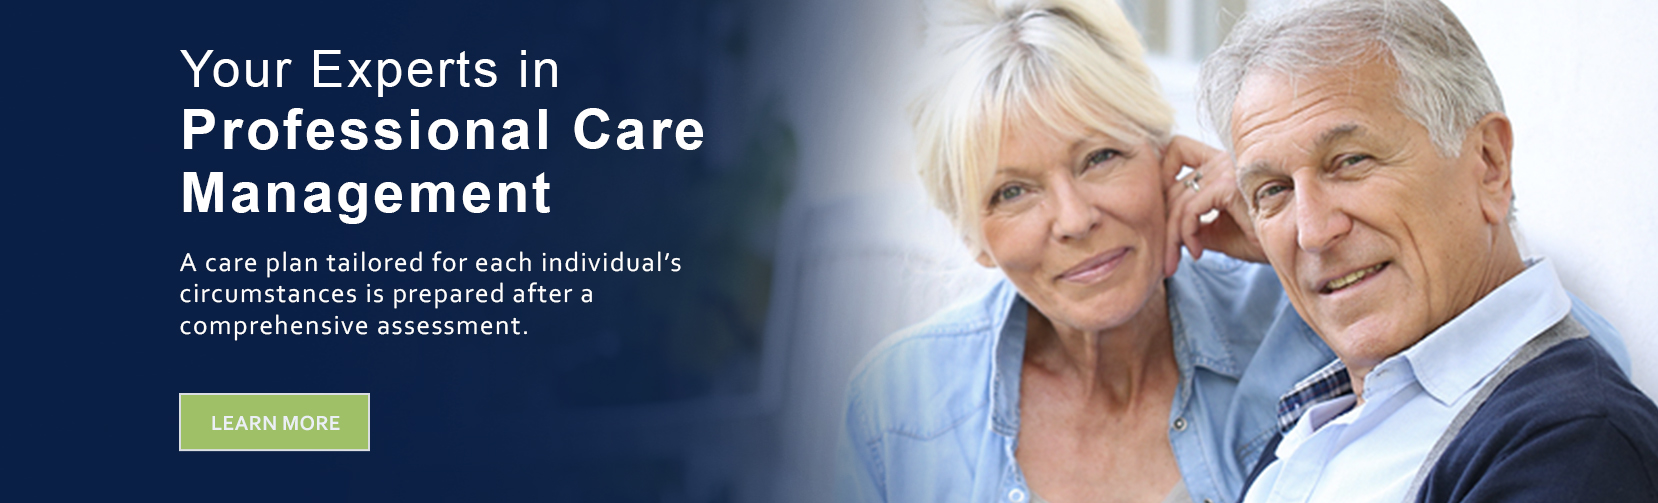 Your Experts in Professional Care